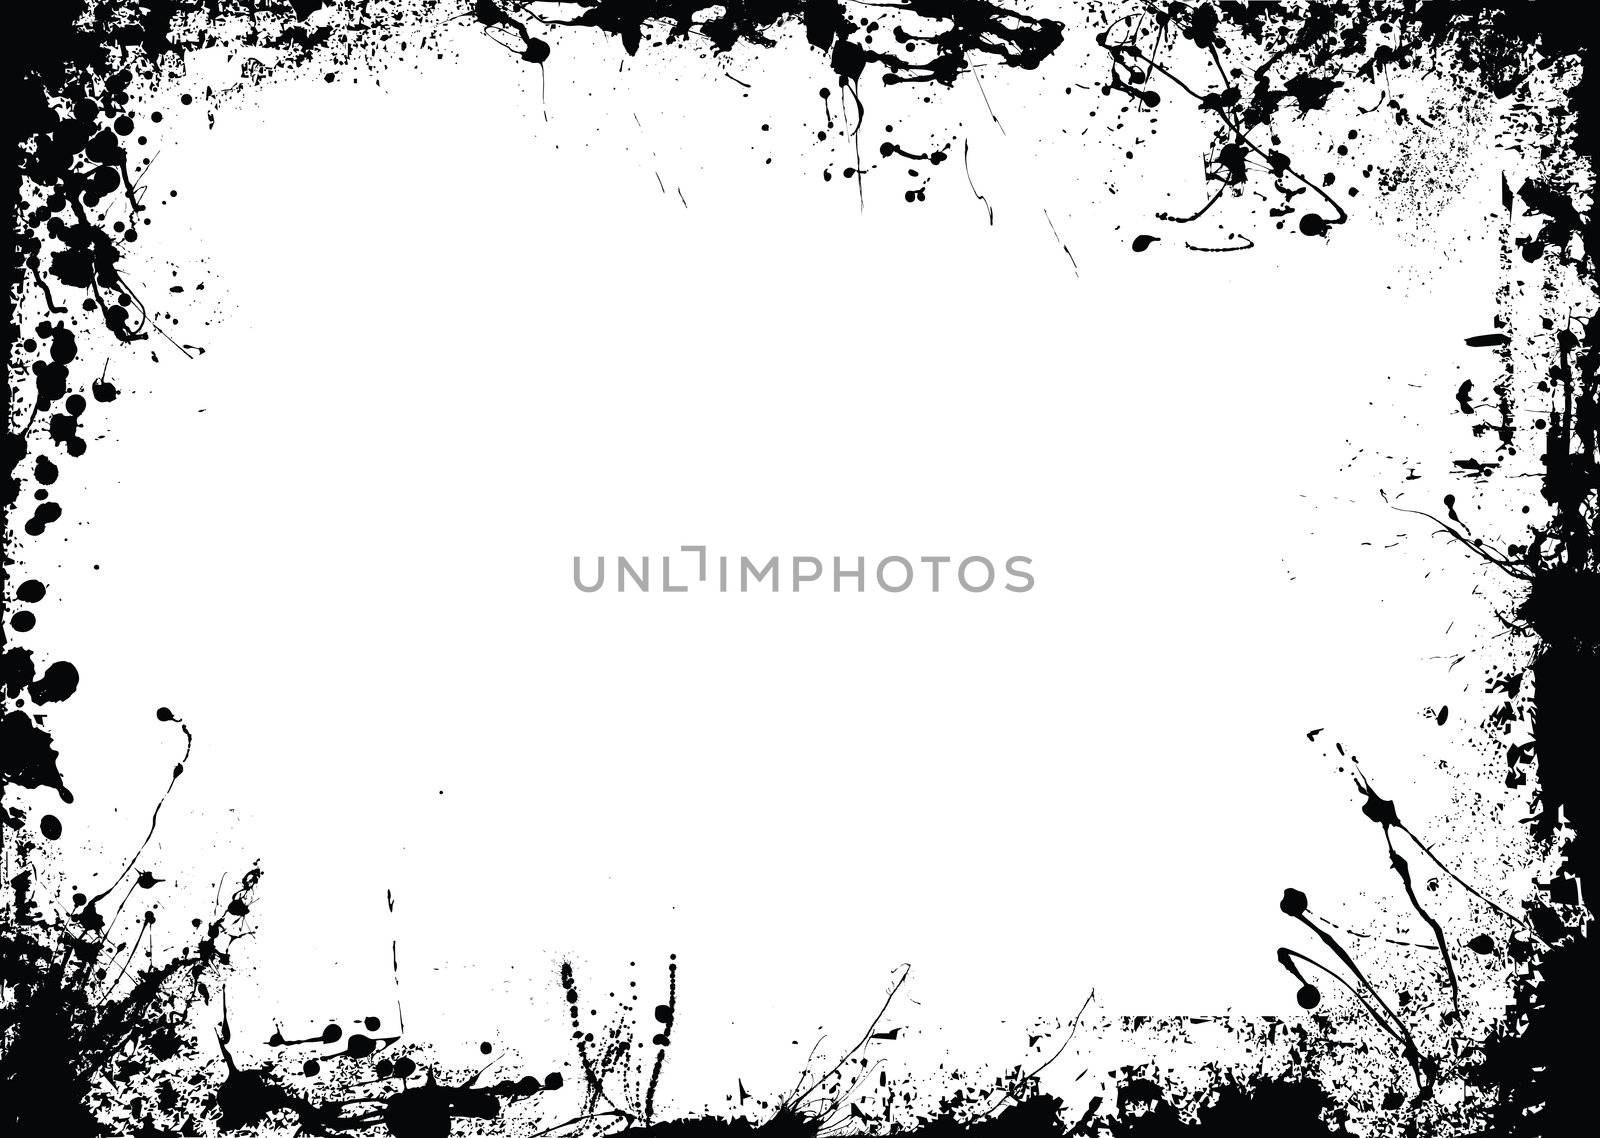 Abstract black and white ink border with copy space